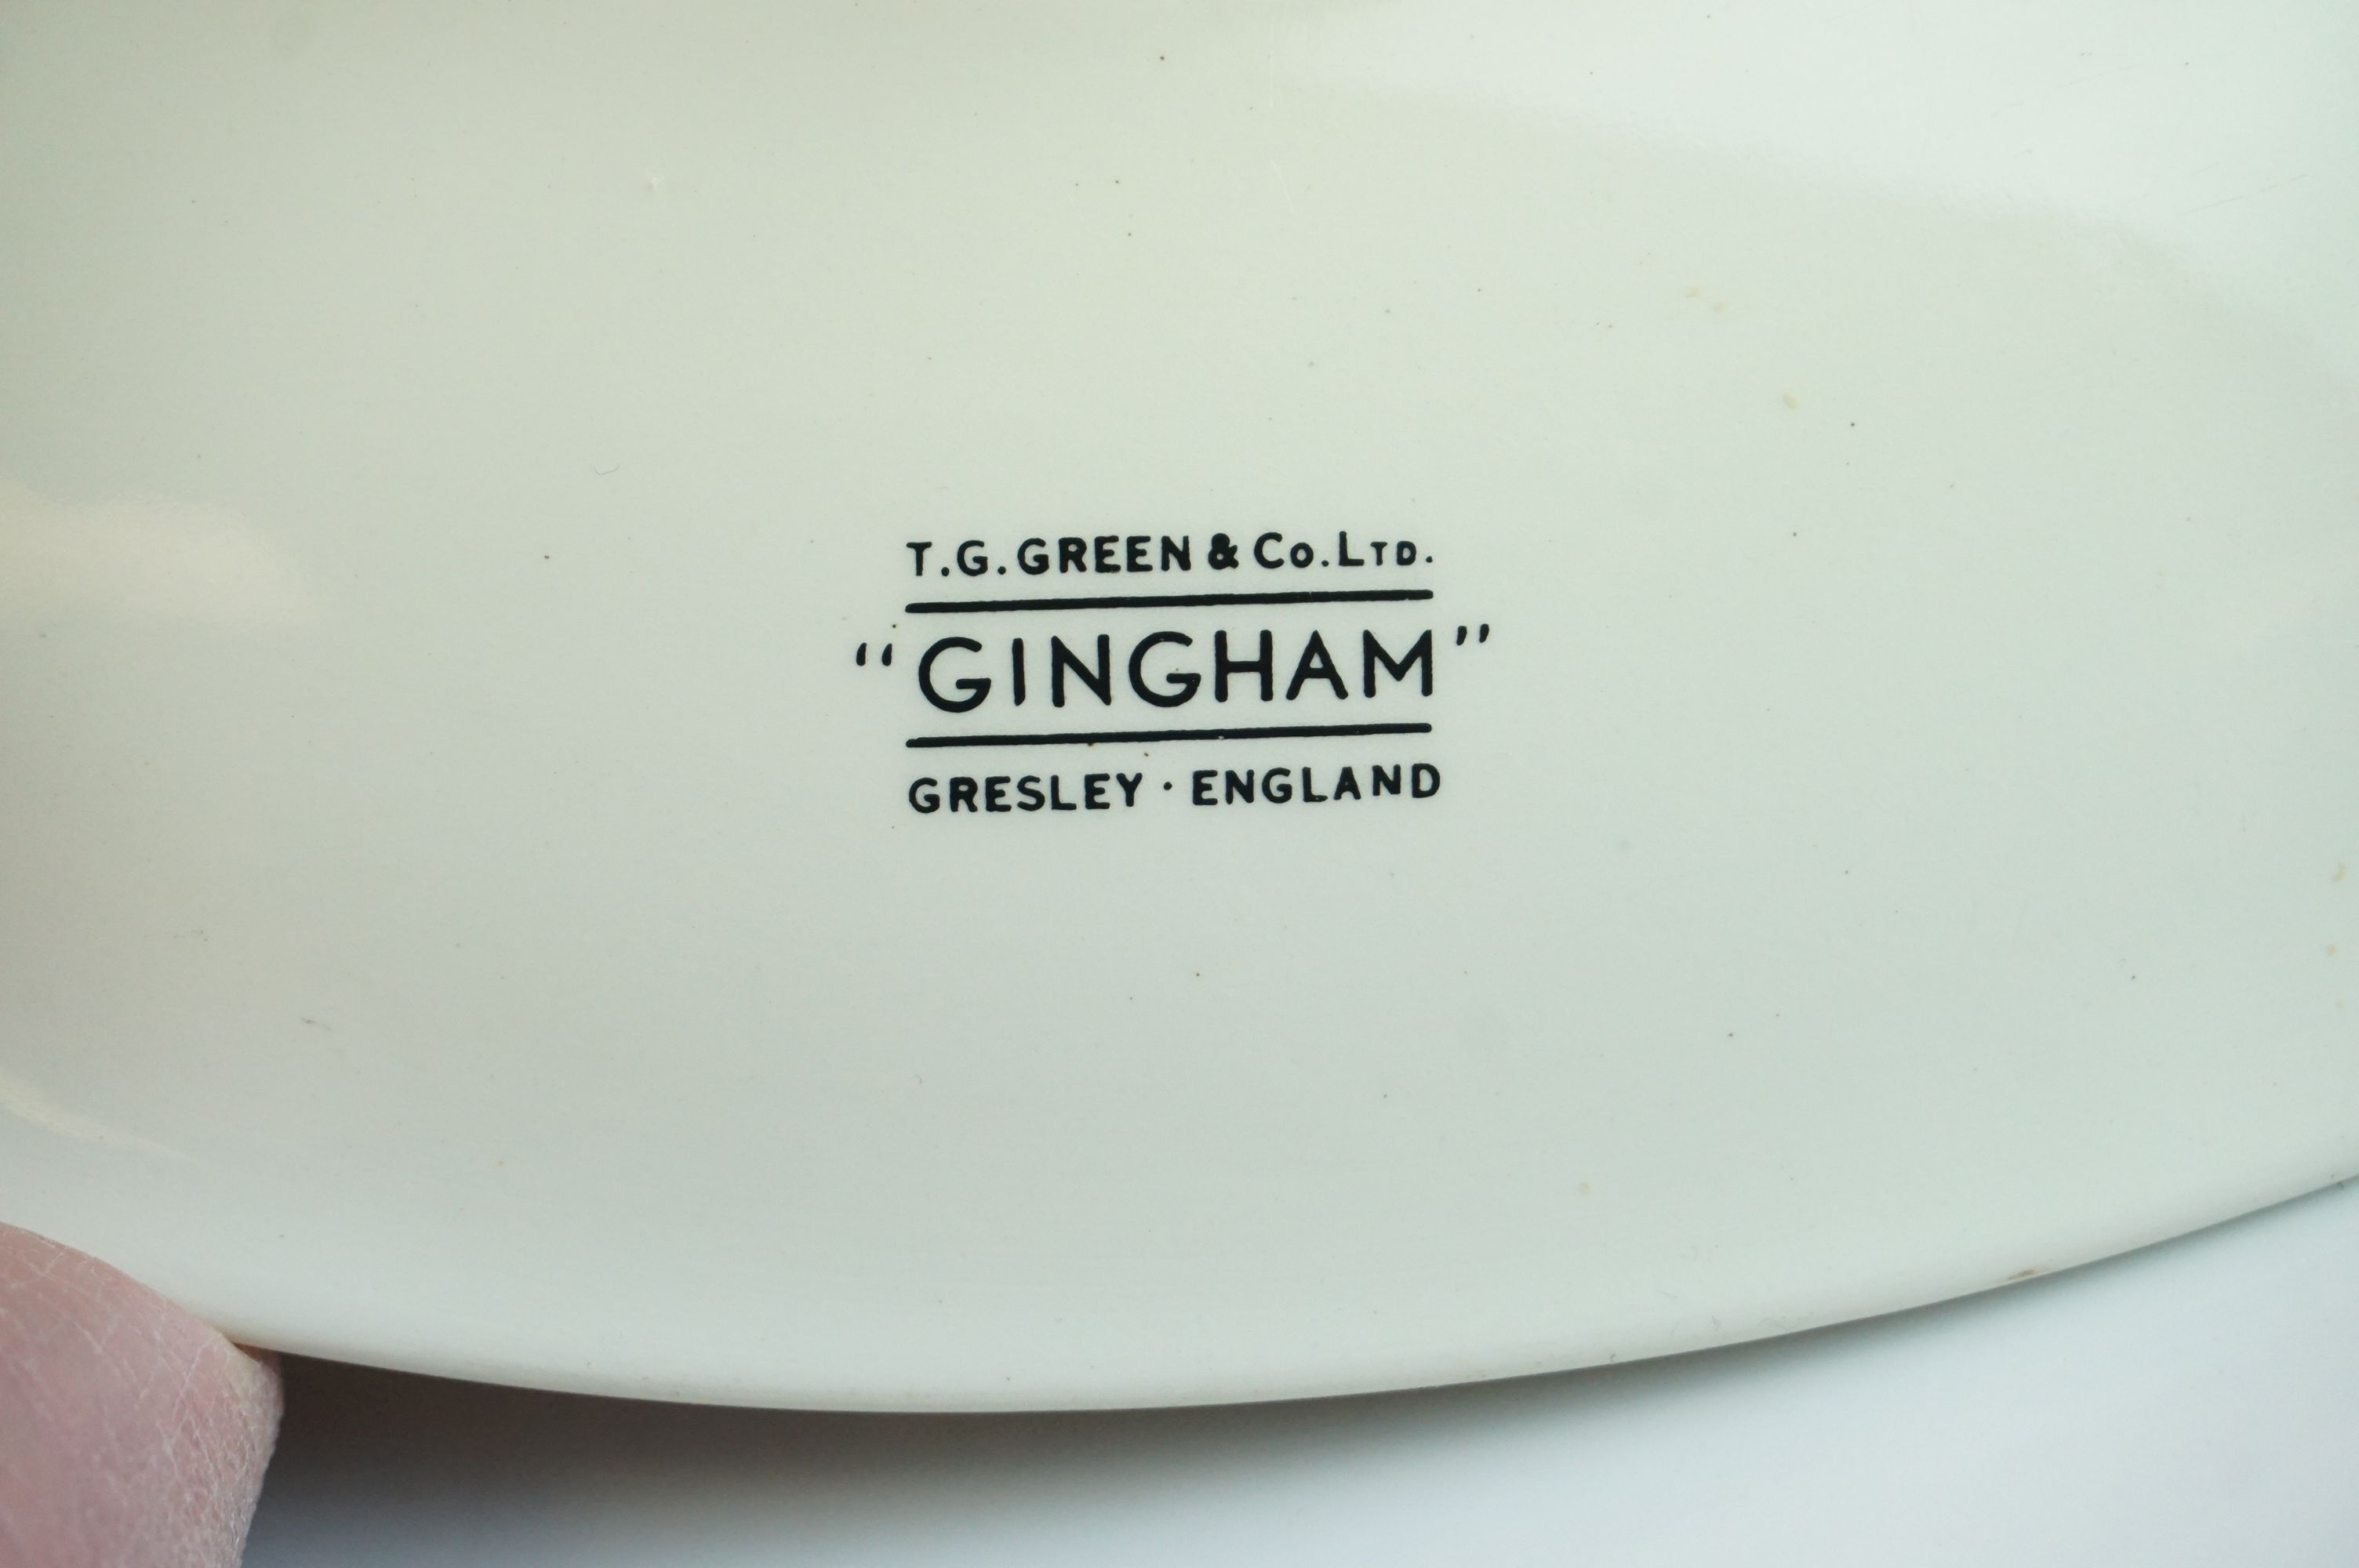 Mid 20th century Retro T. G. Green & Co ' Gingham ' Ceramic Smiths Sectric Wall Clock, 24cms high - Image 4 of 5